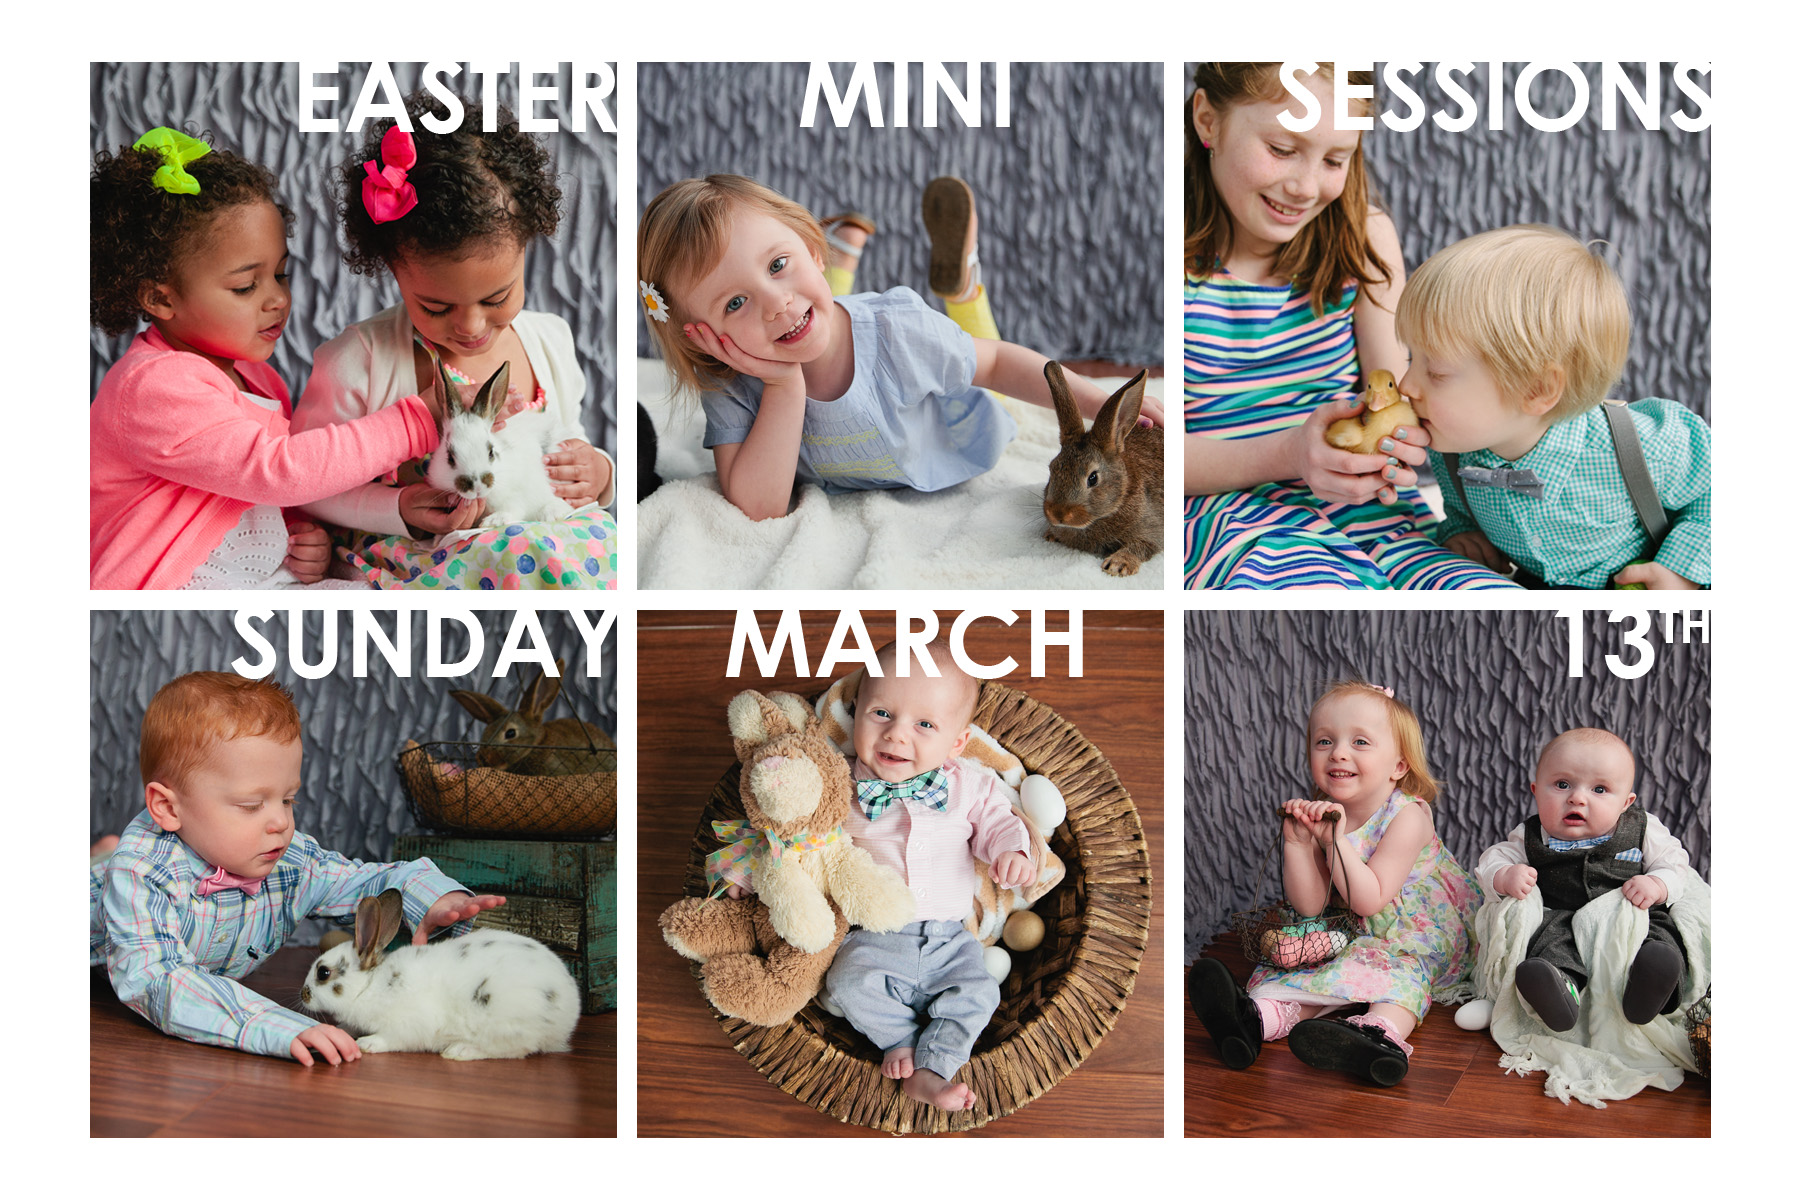 easter mini sessions, photos with real bunnies and ducklings, candid contrast photography